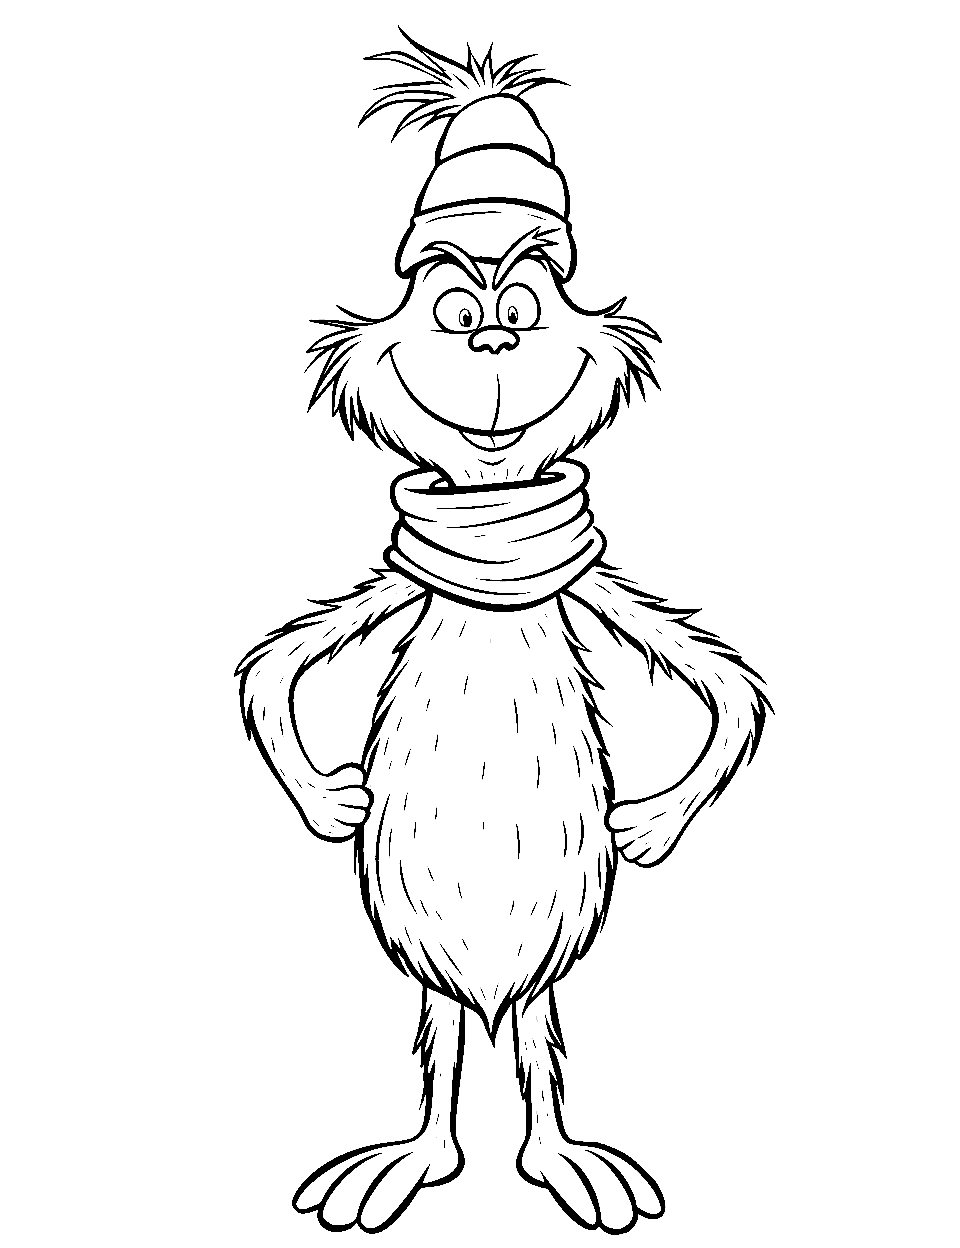 Festive Muffler Wearing Coloring Page - The Grinch is wearing a festive muffler, looking cozy.